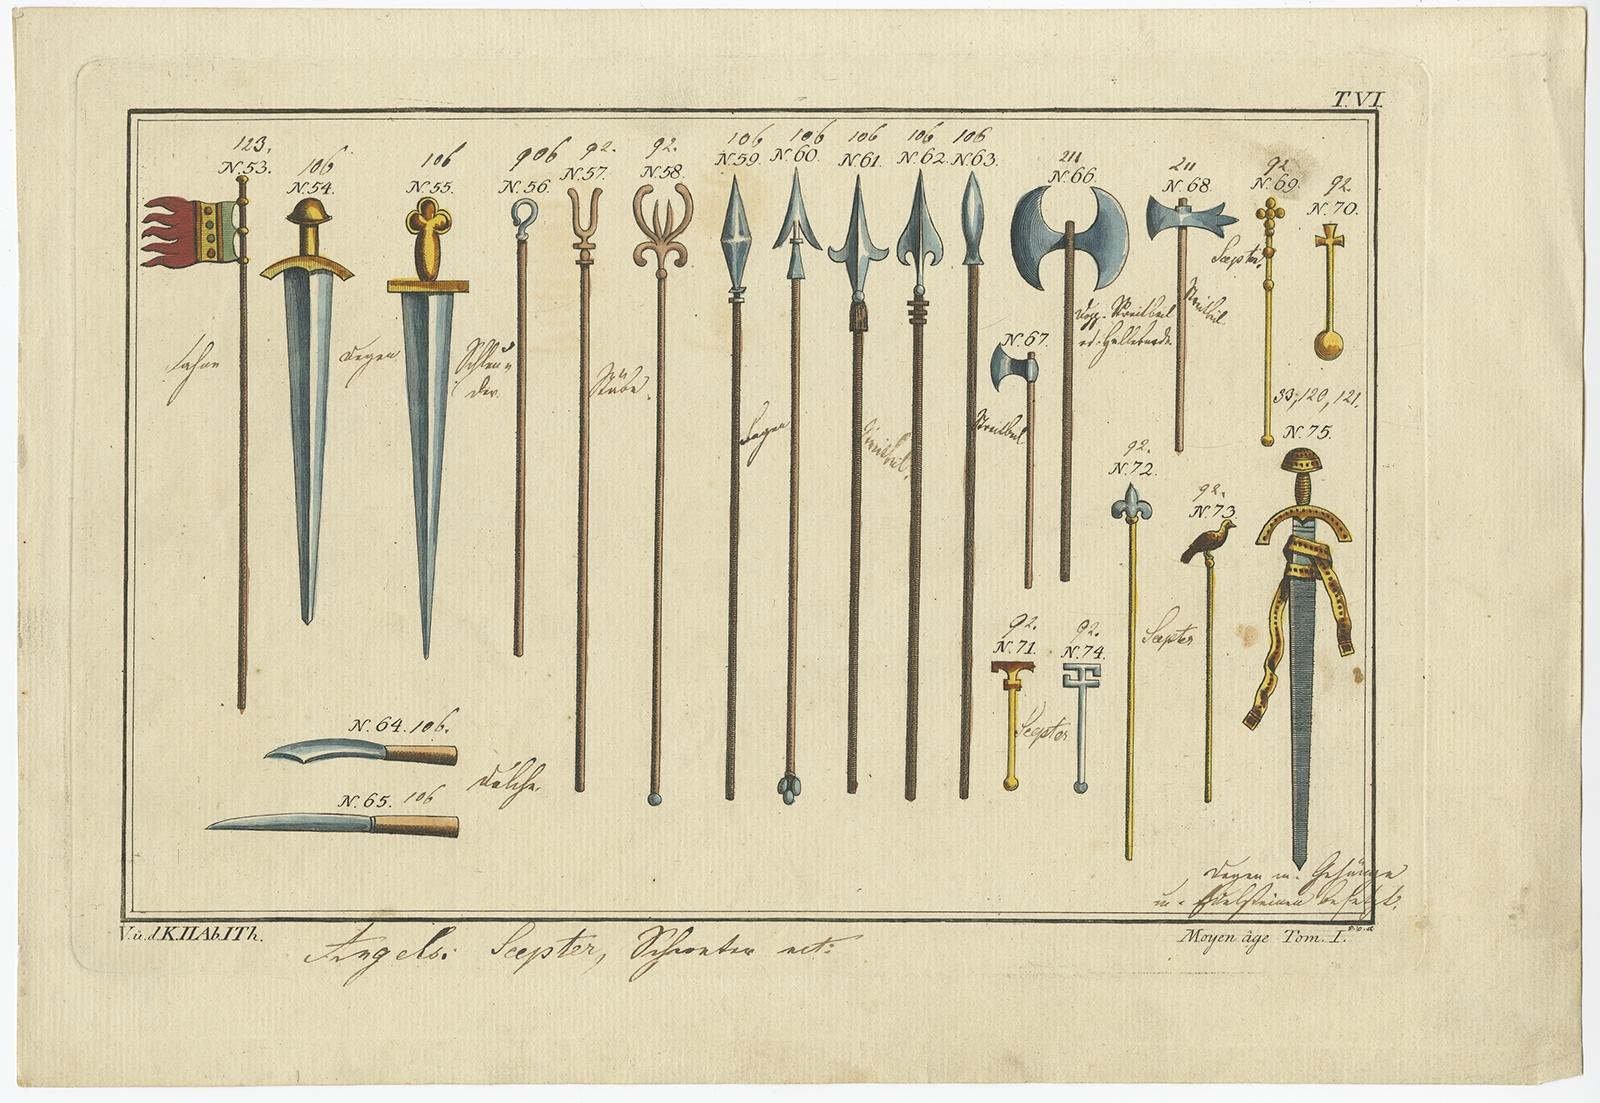 Untitled print of Anglo Saxon flag (53) , swords (54,55), slingshot (56), magisterial staffs (57,58,74) lances (59-63), daggers (64,65), double headed axe of the Danes called a Bipennis (66), Danish axes (67,68), Anglo Saxon scepters (69-73), and an